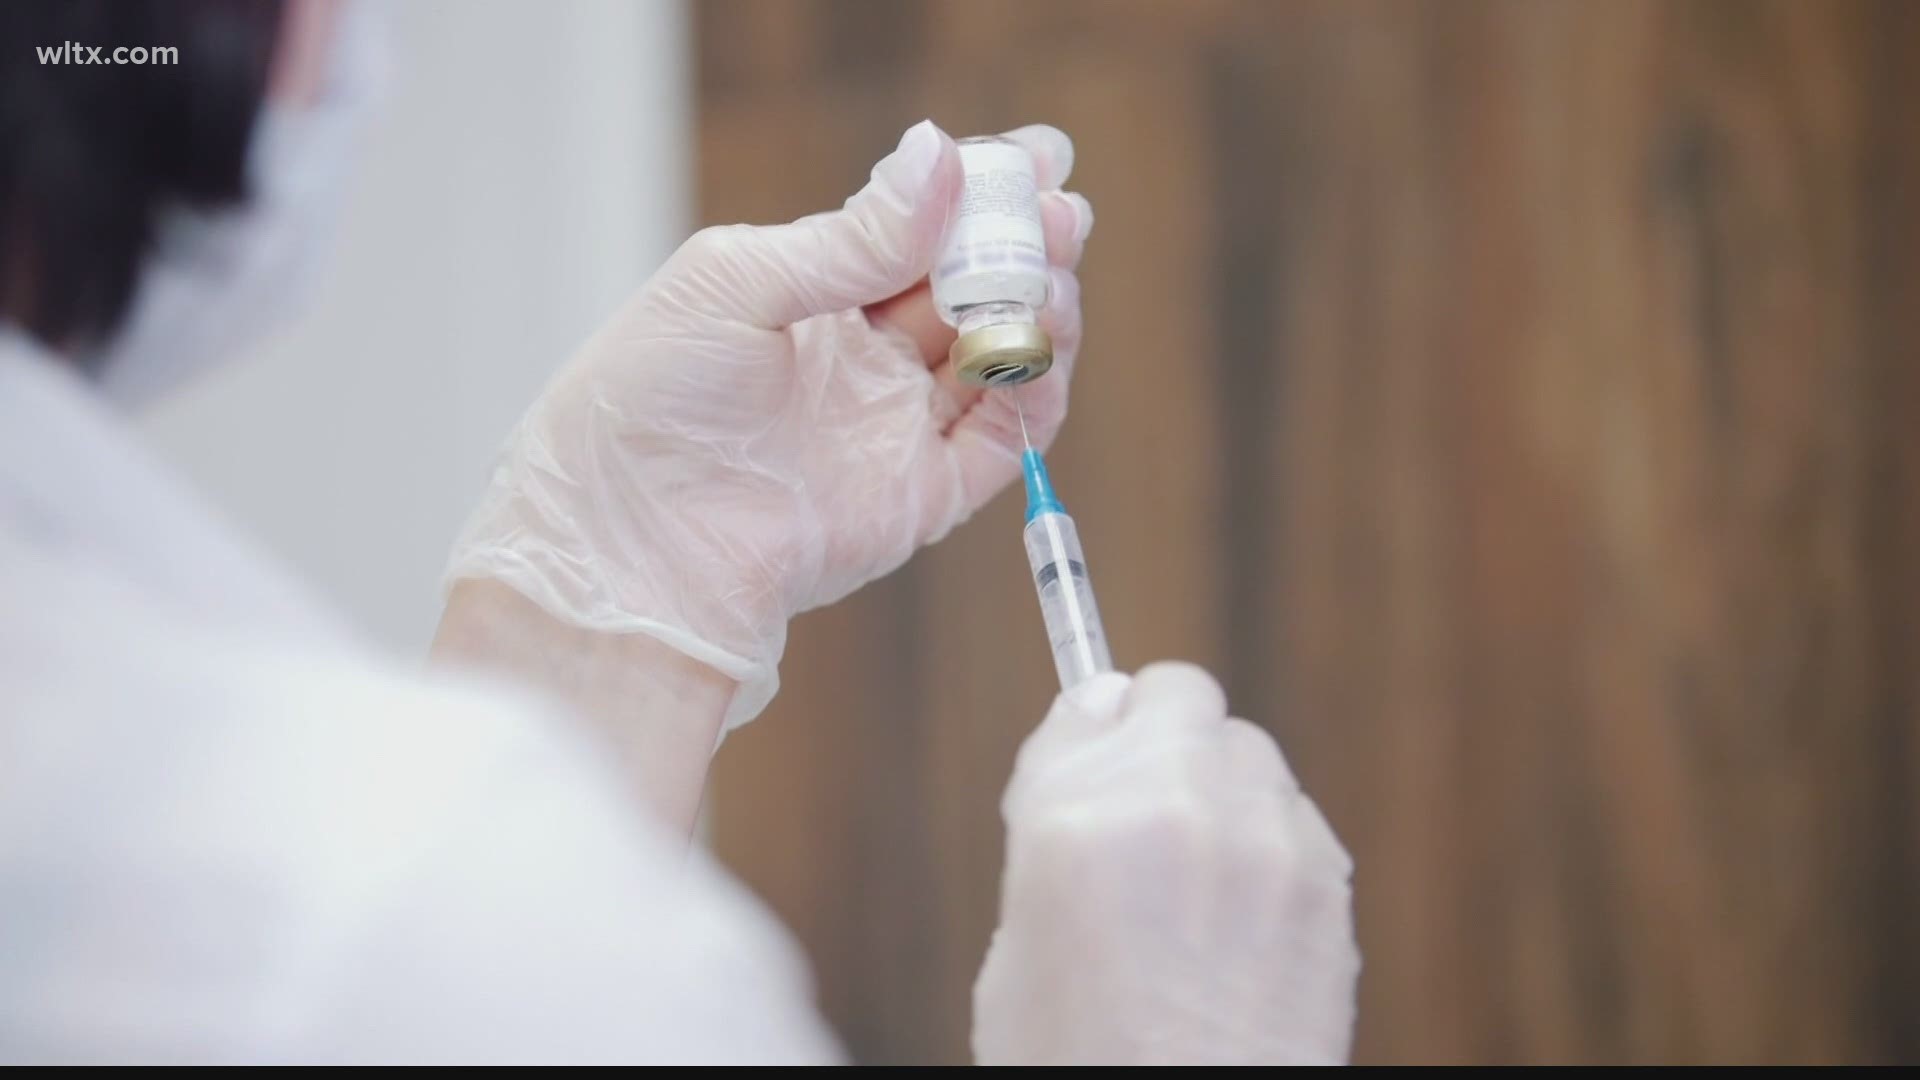 After vaccine shipment delays caused appointment cancellations, state health officials say they're going to change the way they allocate doses.